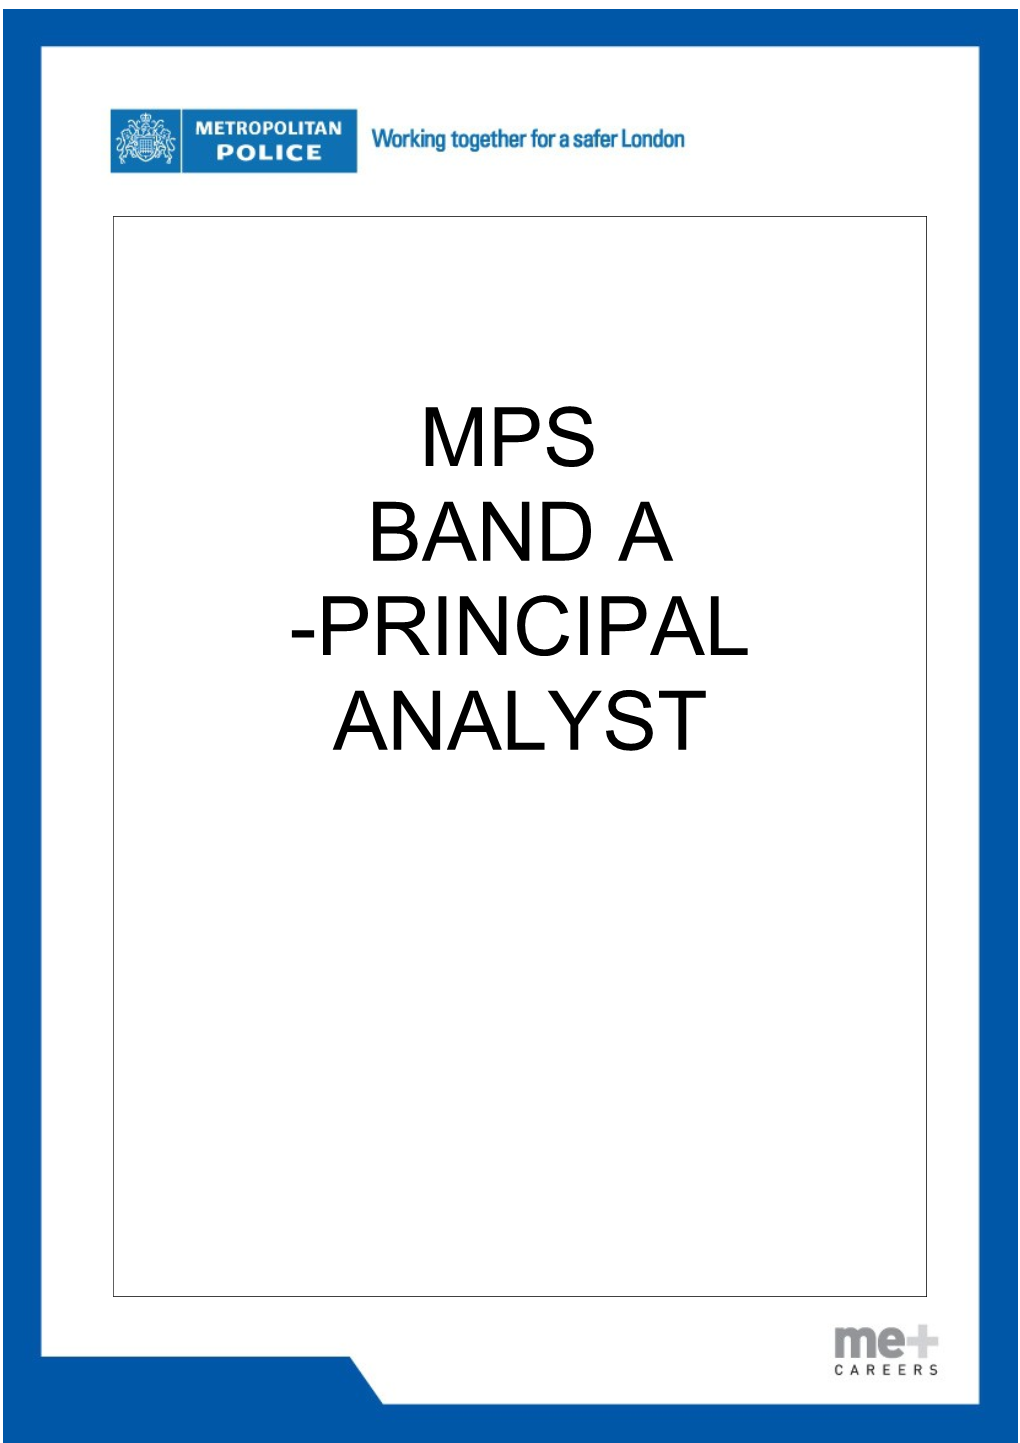 Mps Selection Process for Band a - Principal Analyst